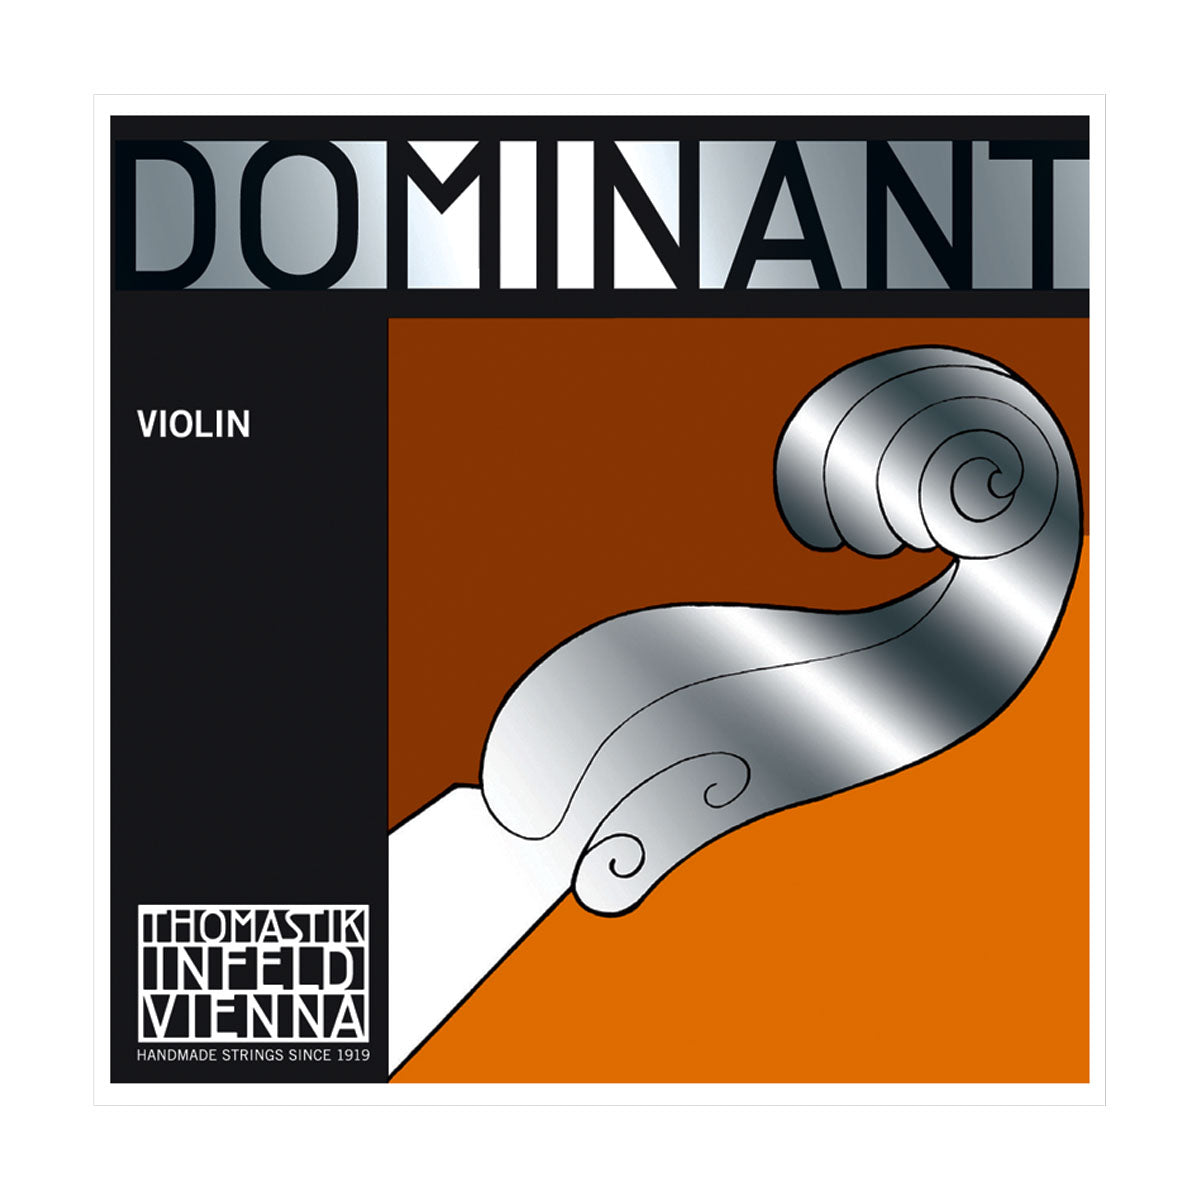 Dominant Violin Strings, Thomastik Infeld, Austria, full size, 4/4, 3/4, 1/2, 1/4, 1/8, 1/16, hand-picked and inspected by Violins and such, with TEO musical Instruments, London Ontario Canada